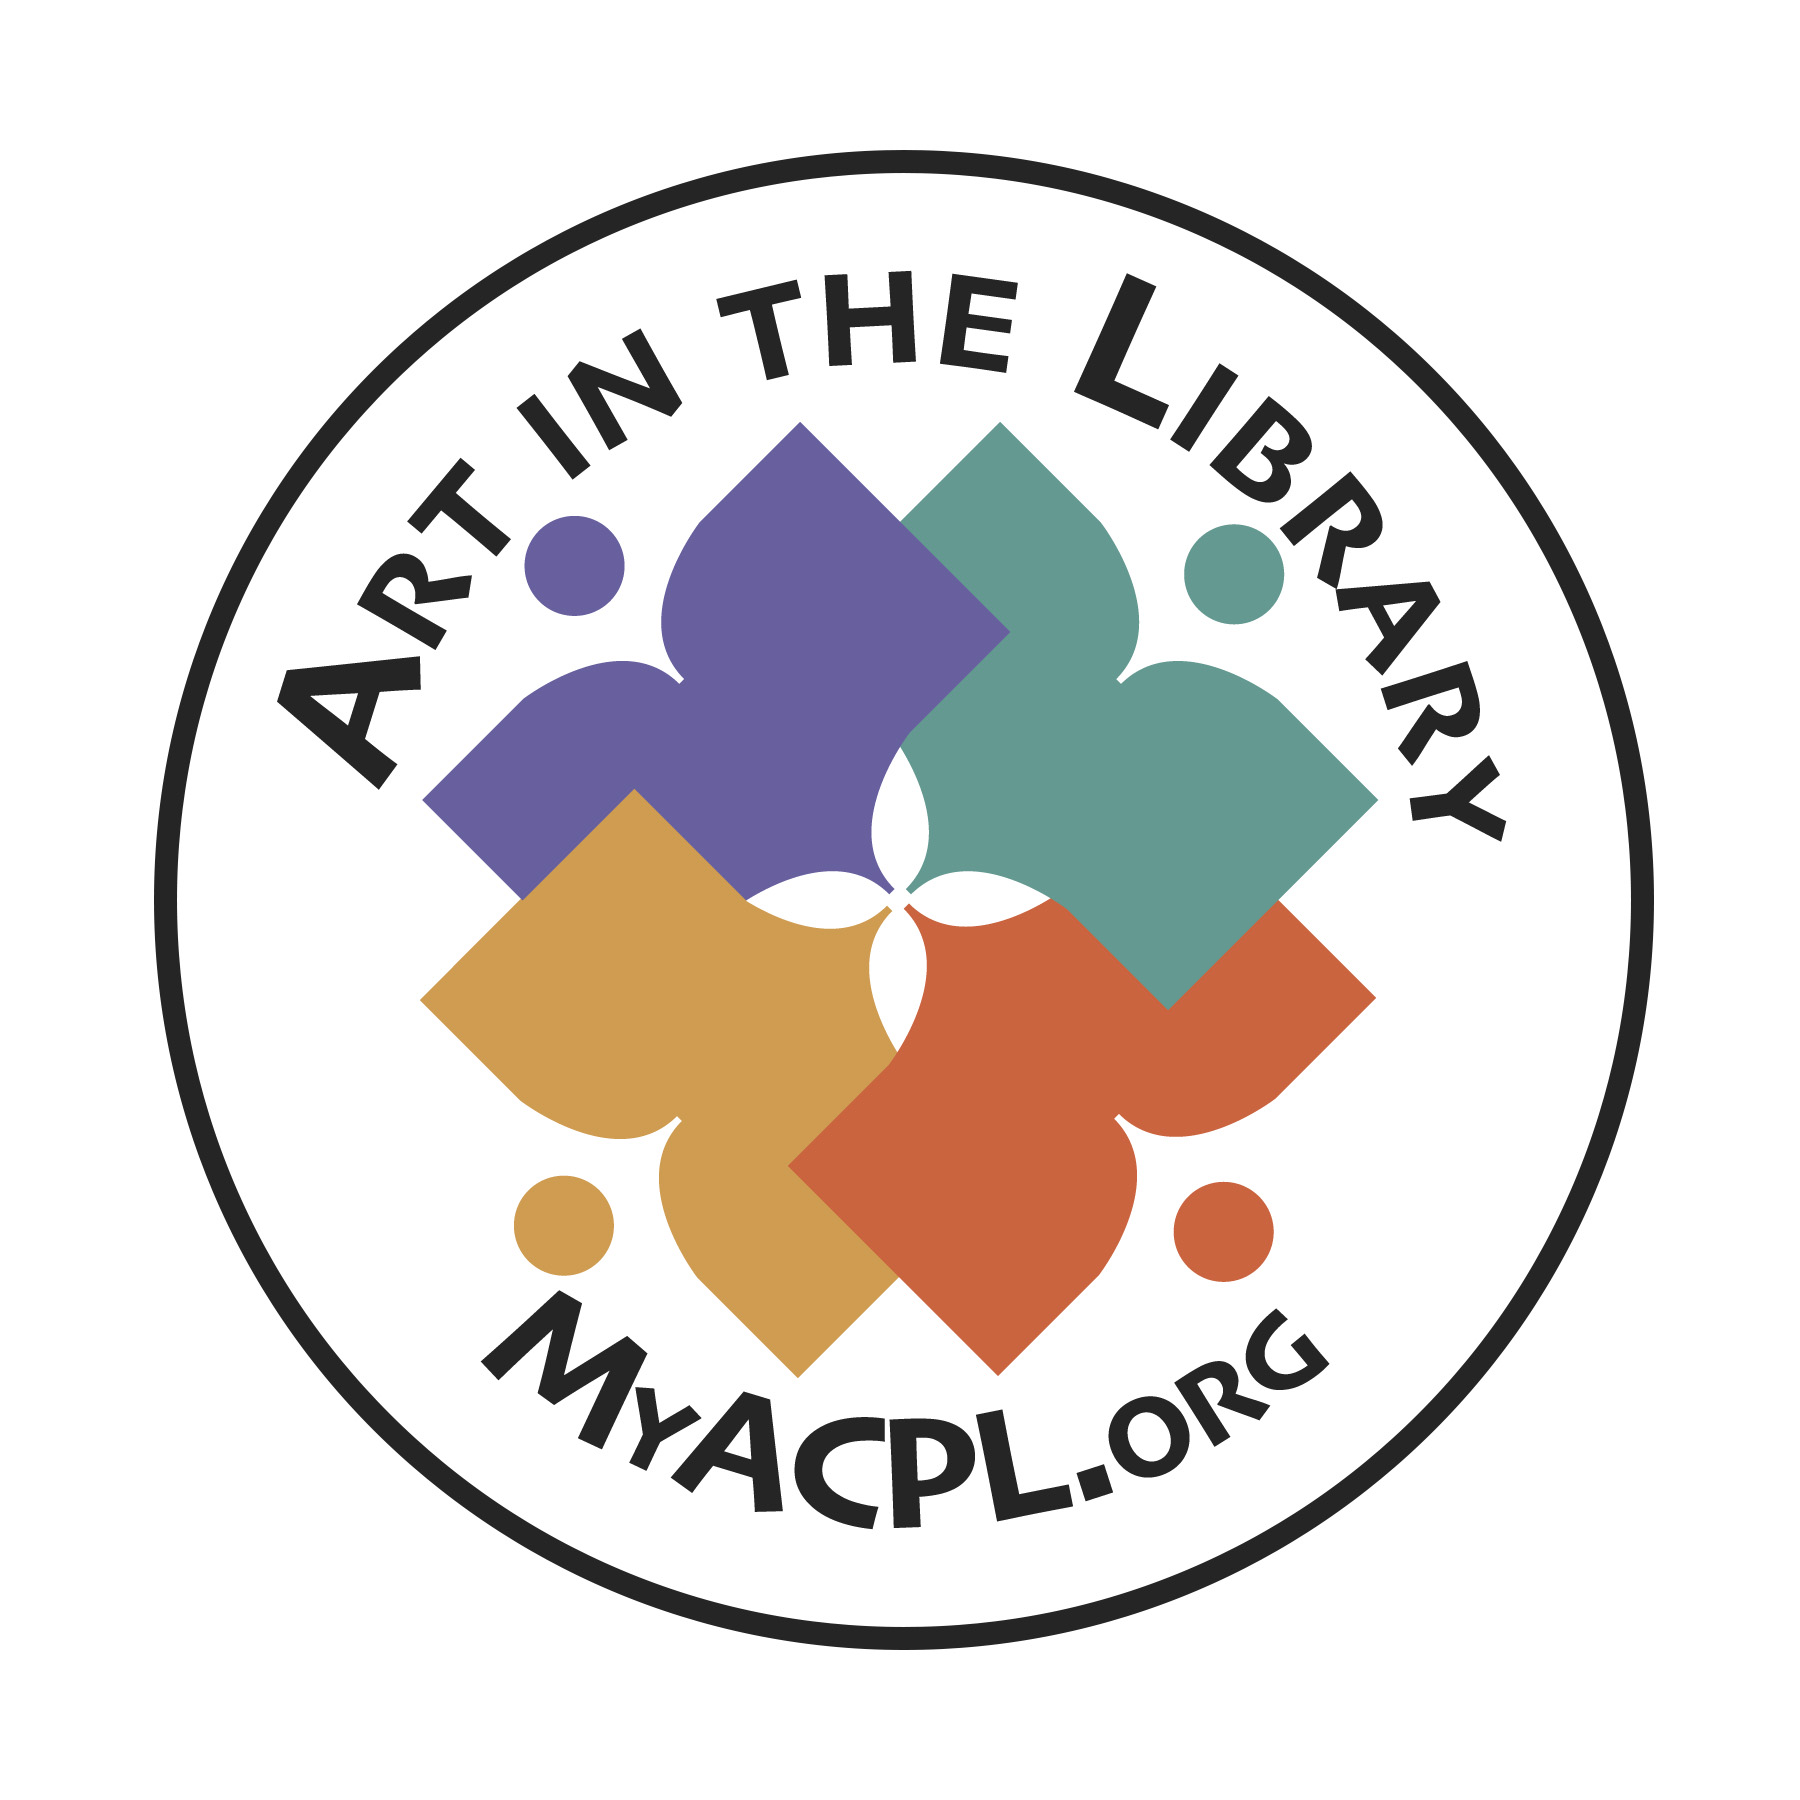 The official logo of our Art in the Library exhibit series.